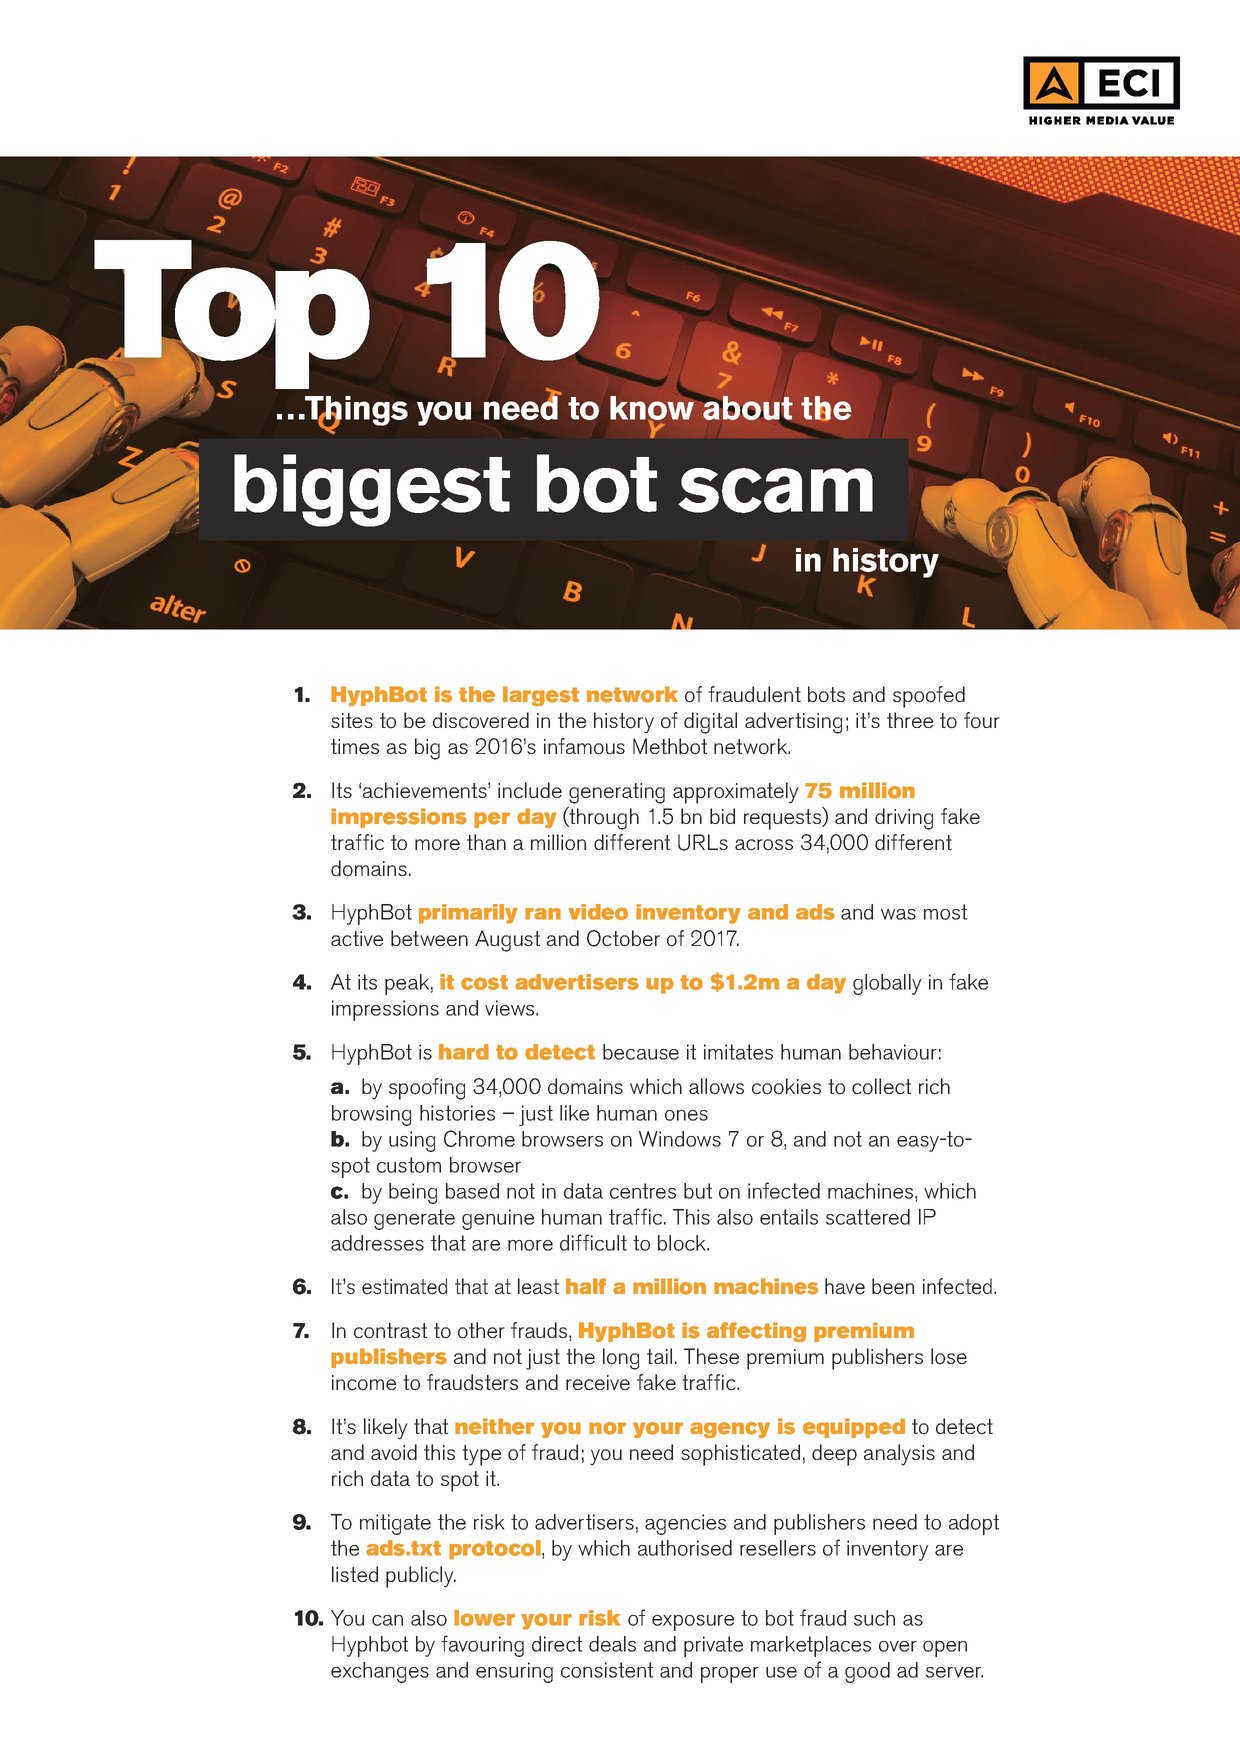 Top-10-Things-You-need-to-know-about-the-biggest-bot-scam-in-history001